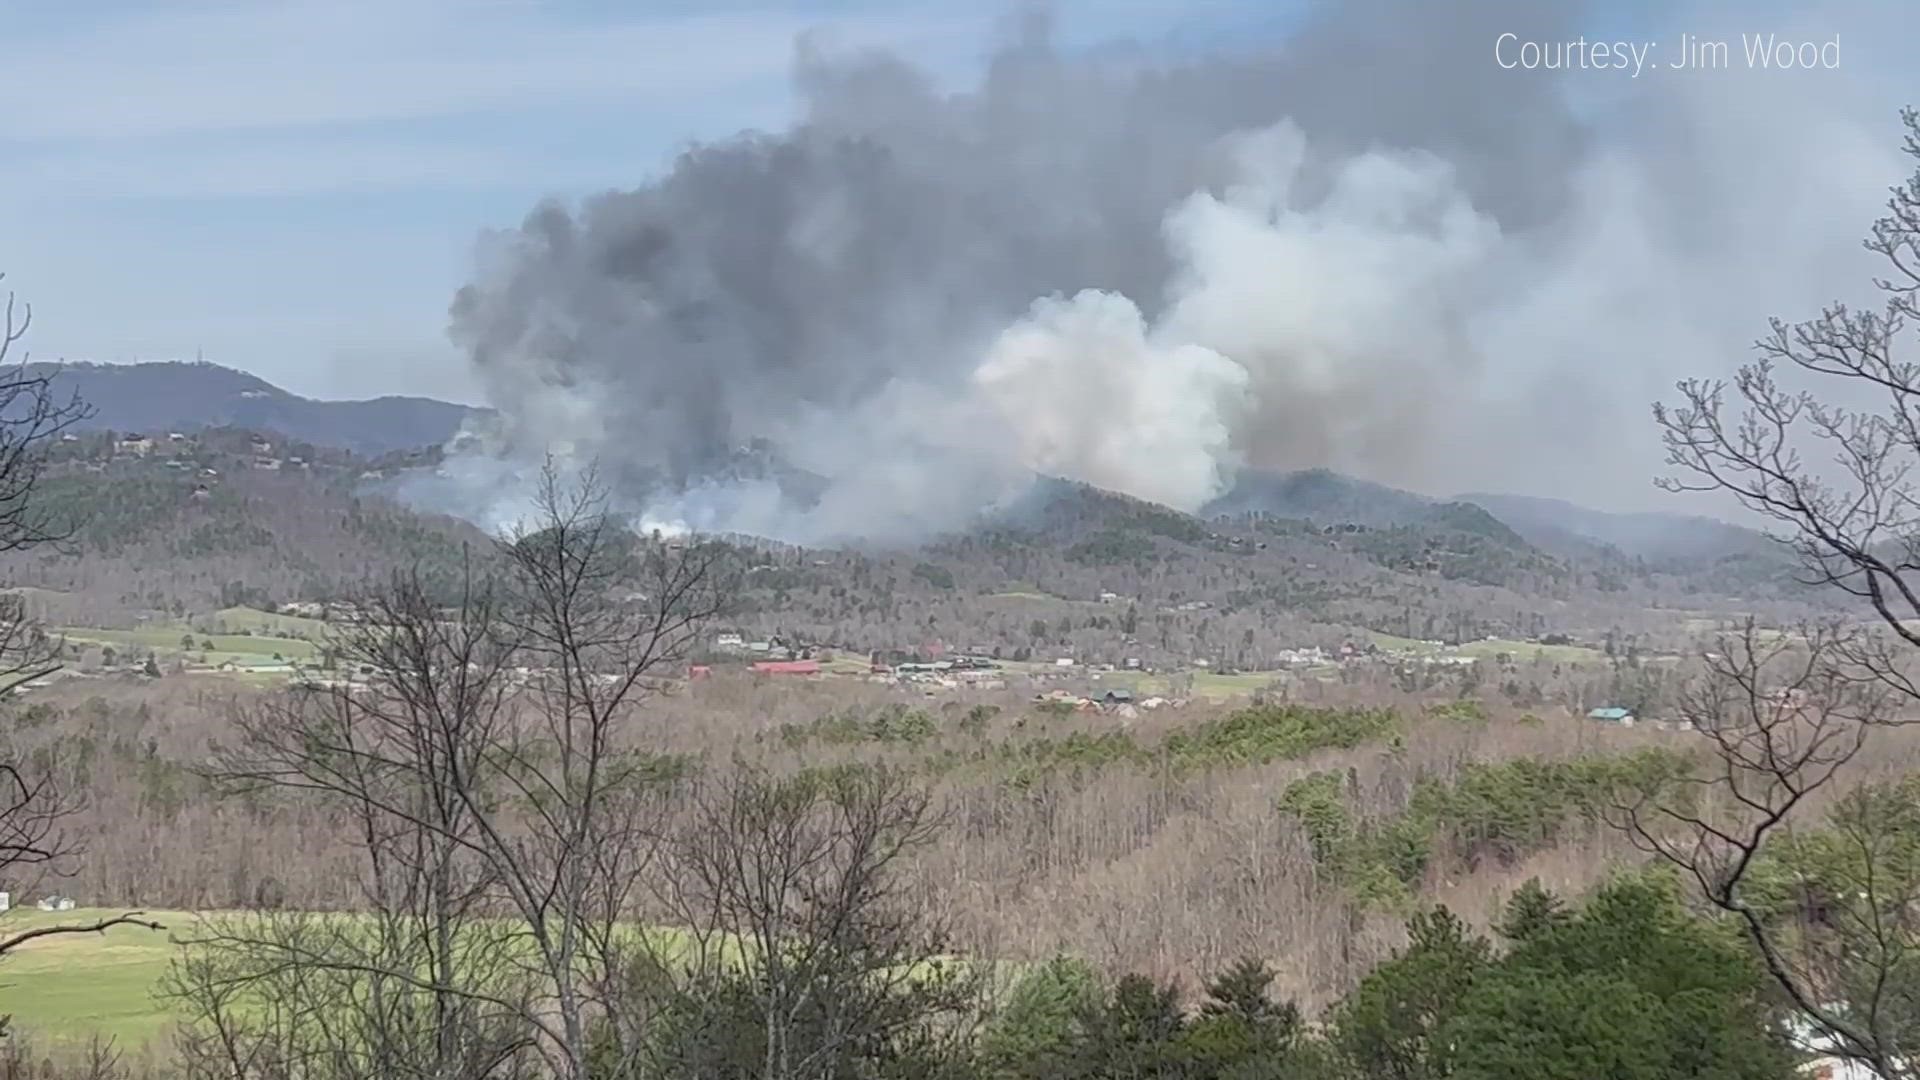 Jim Wood shared this video of smoke from the fire burning in Wears Valley with WBIR.